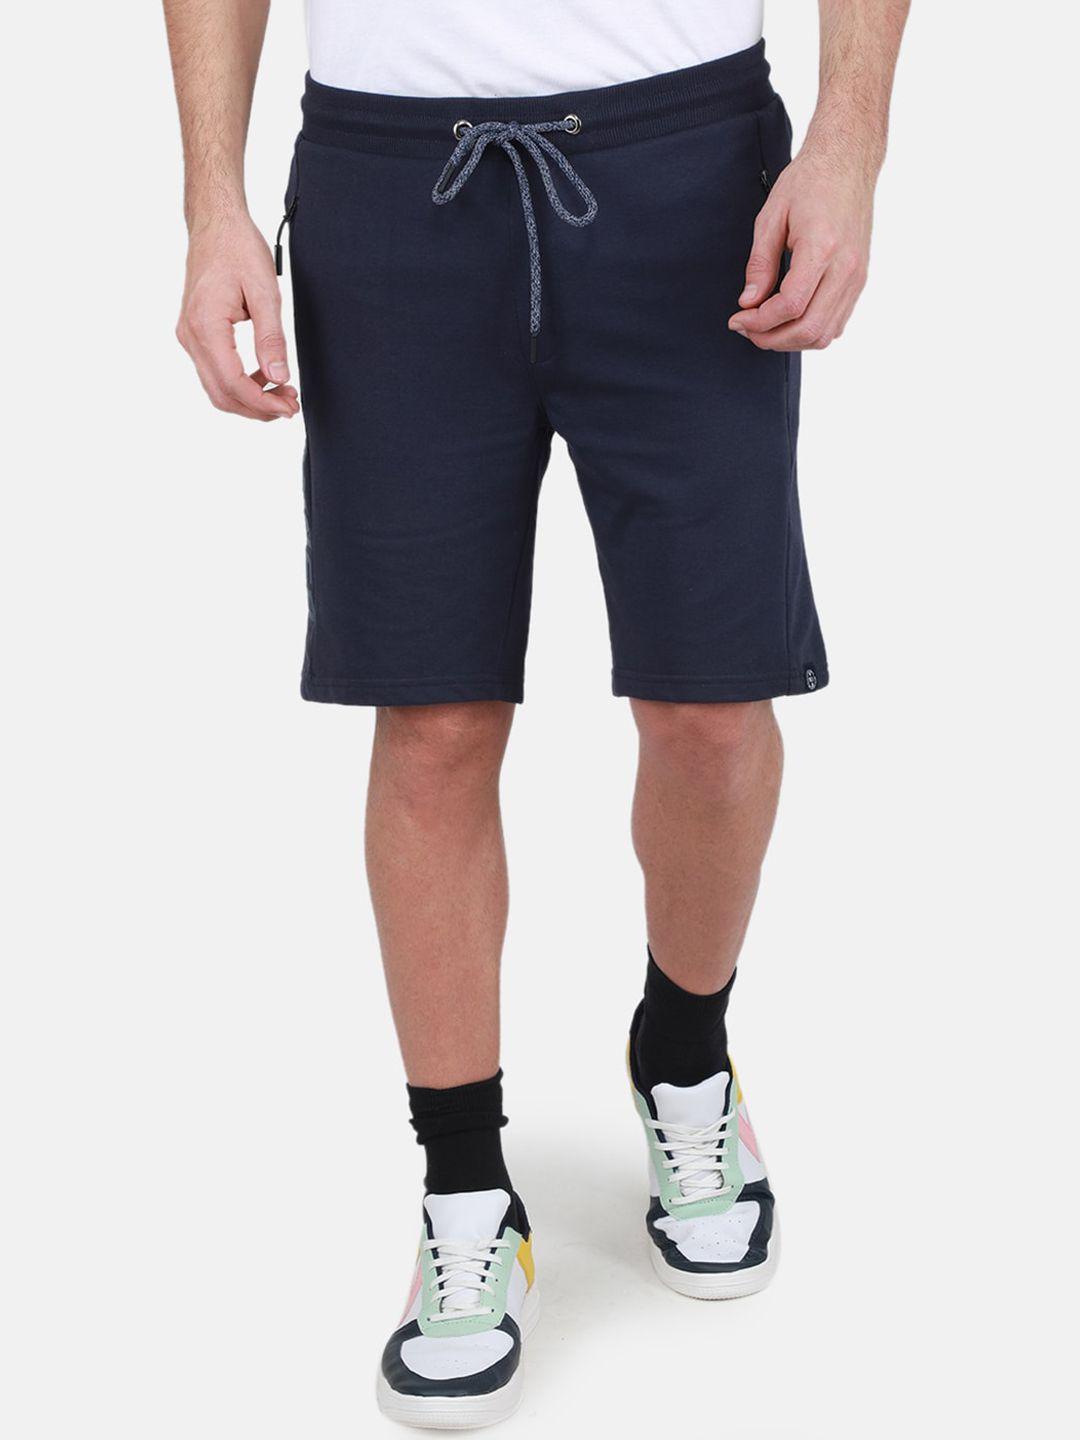 monte-carlo-men-mid-rise-knee-length-casual-shorts